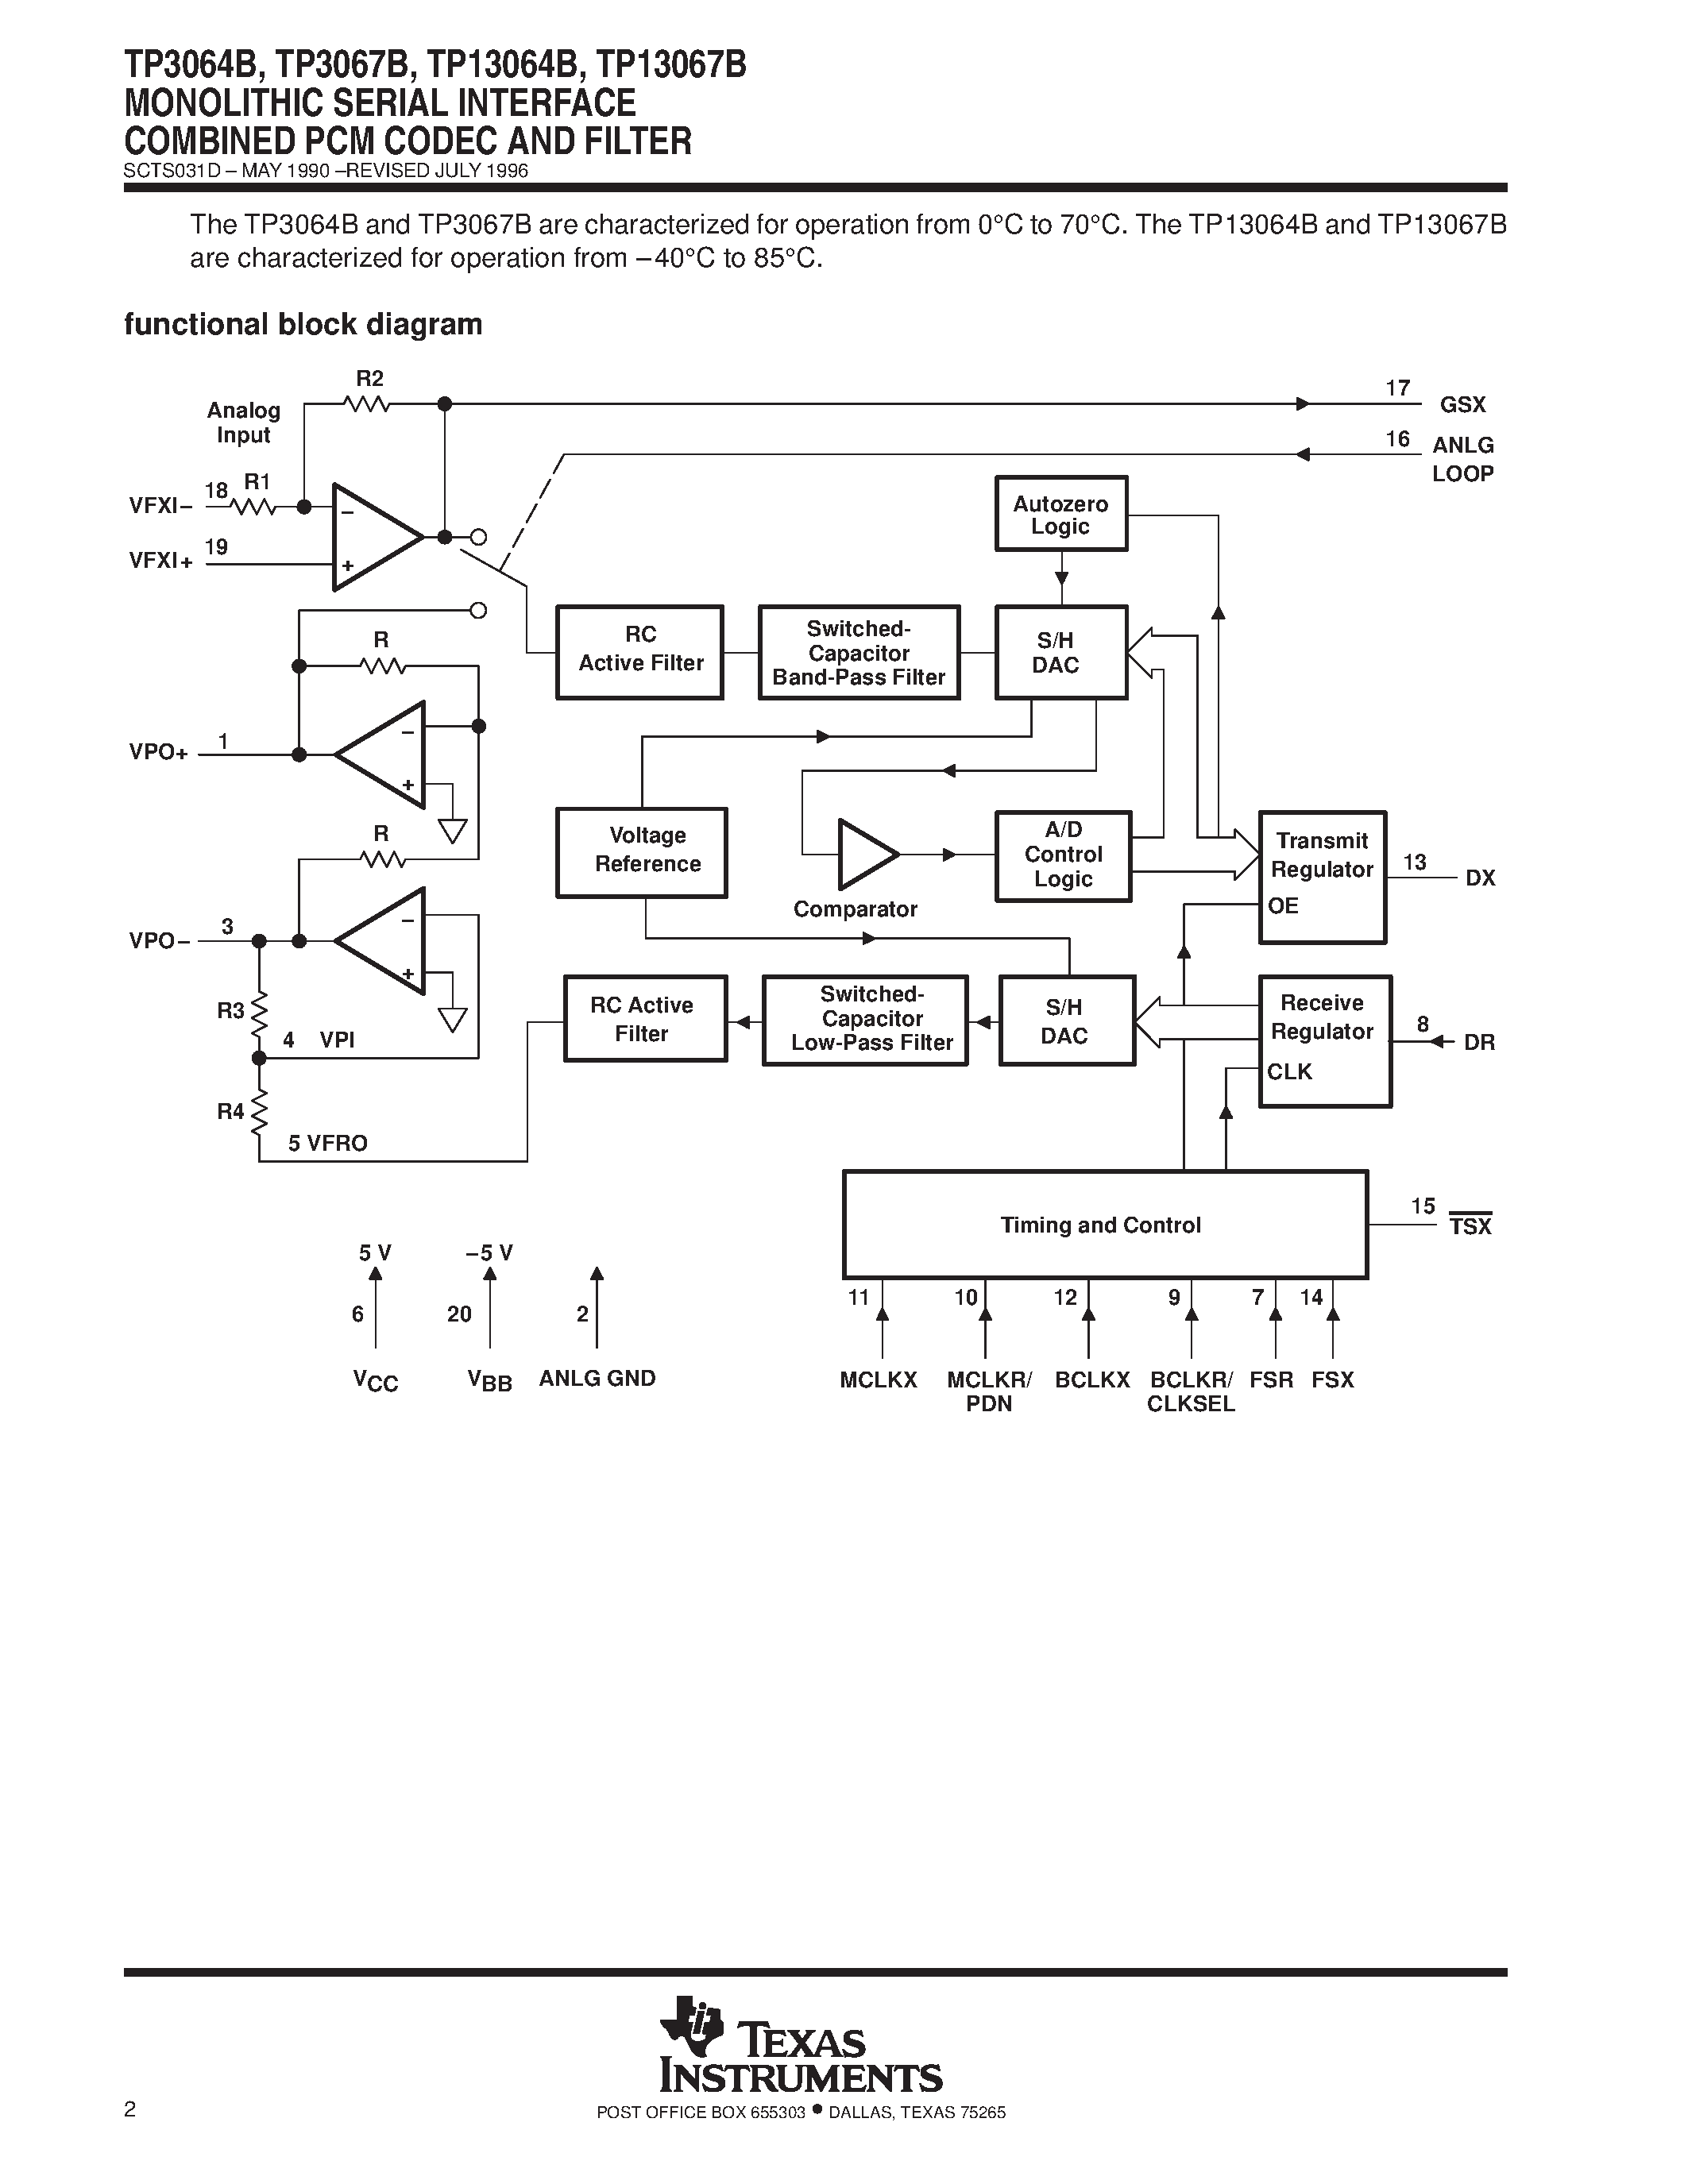 Datasheet TP13067B - MONOLITHIC SERIAL INTERFACE COMBINED PCM CODEC AND FILTER page 2